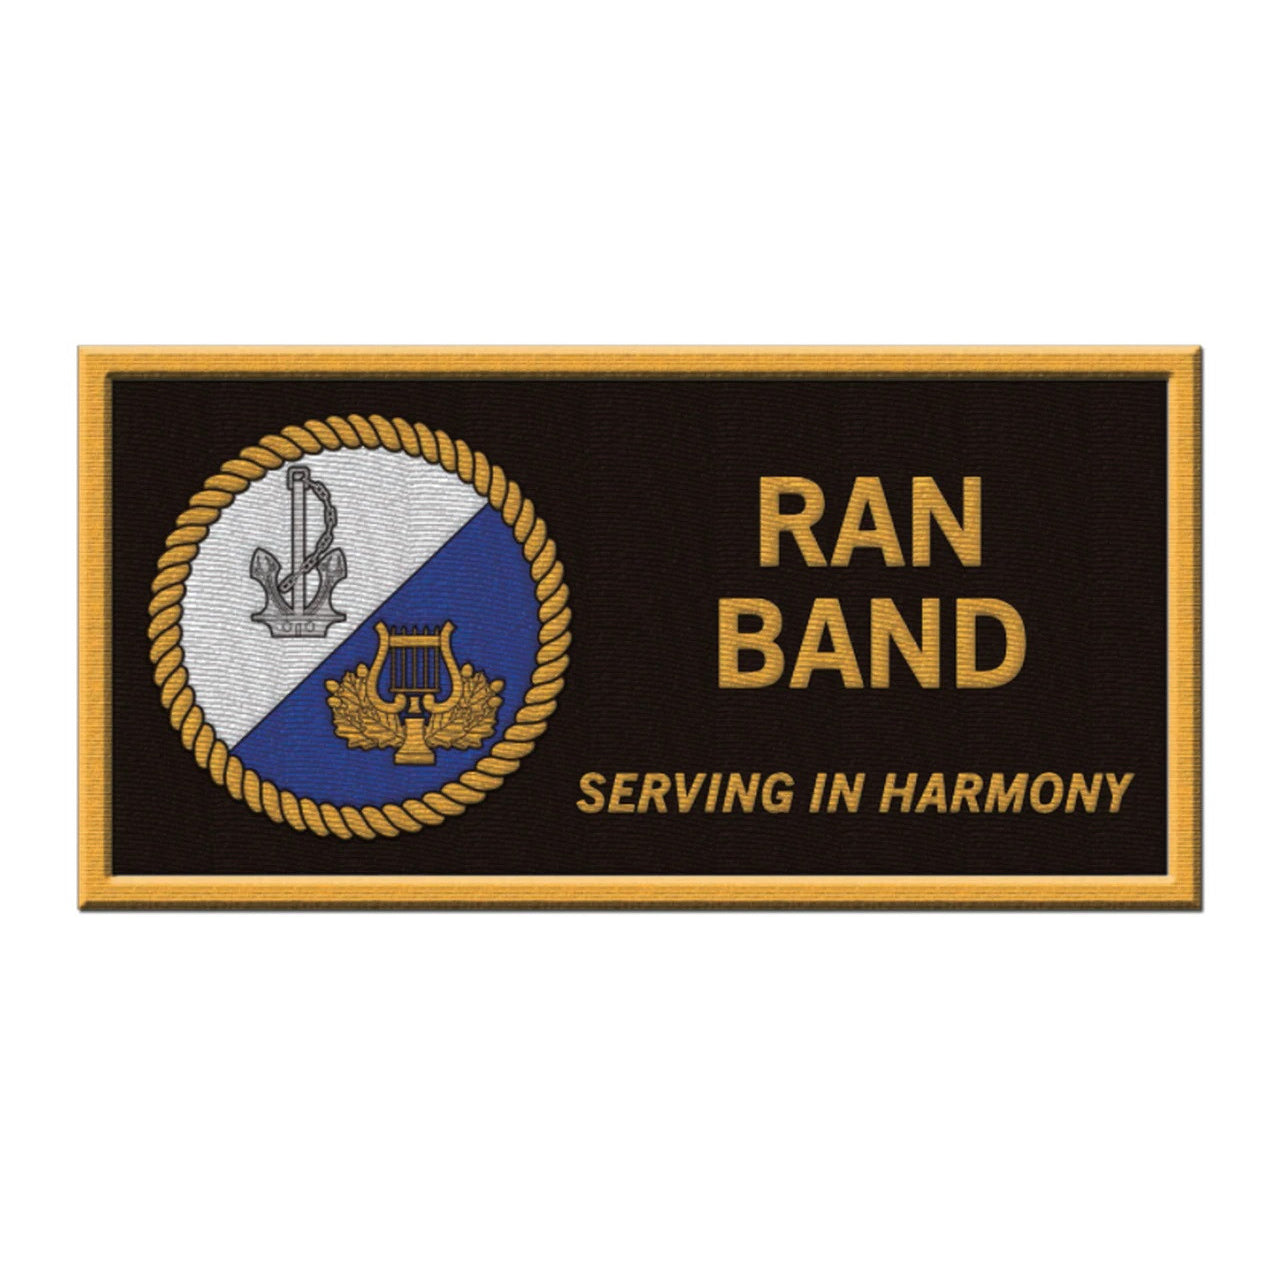 Get your hands on the perfect Navy Band uniform patch today! Made with high-quality materials, this embroidered patch is the ideal size and features a merrow border and black hook-and-loop backing. Place your order now to proudly display your love for the Navy Band! www.defenceqstore.com.au